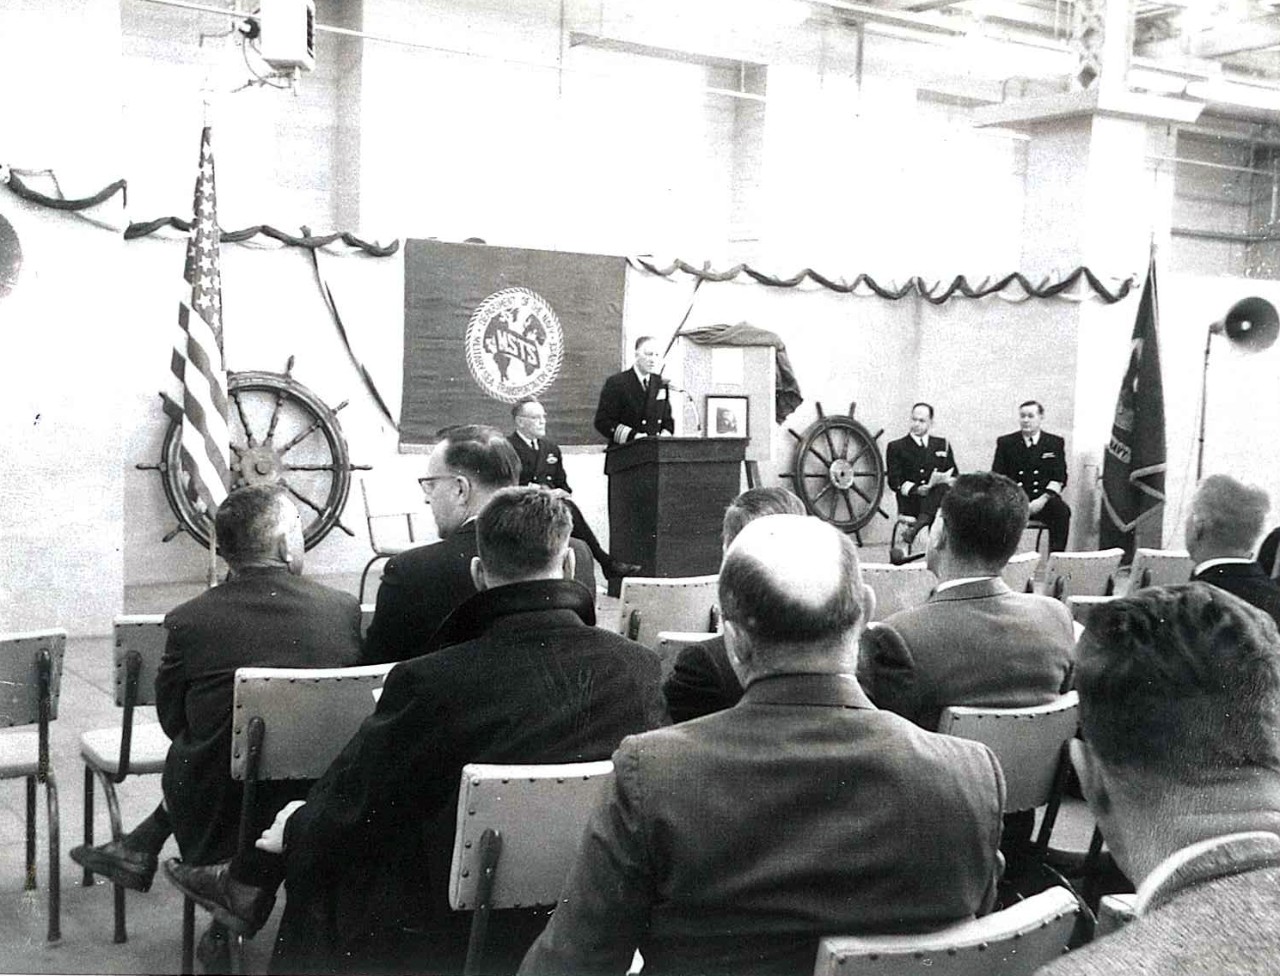 NMUSN-4563  USNS James M. Gilliss presentation at Naval Historical Display Center, Washington Navy Yard, Washington, D.C. December 14, 1962. Rear Admiral Edward C. Stephan, USNR, gives remarks during the presentation at the Naval Historical Display Center (now the National Museum of the U.S. Navy). This presentation was the first official ceremony held at the Display Center. Rear Admiral Arthur R. Gralla and Captain Slade D. Cutter are to the right. This presentation was the first official ceremony held at the Display Center. The director at the time was World War II veteran, Captain Slade. D. Cutter, USN. National Museum of the U.S. Navy Photograph Collection.